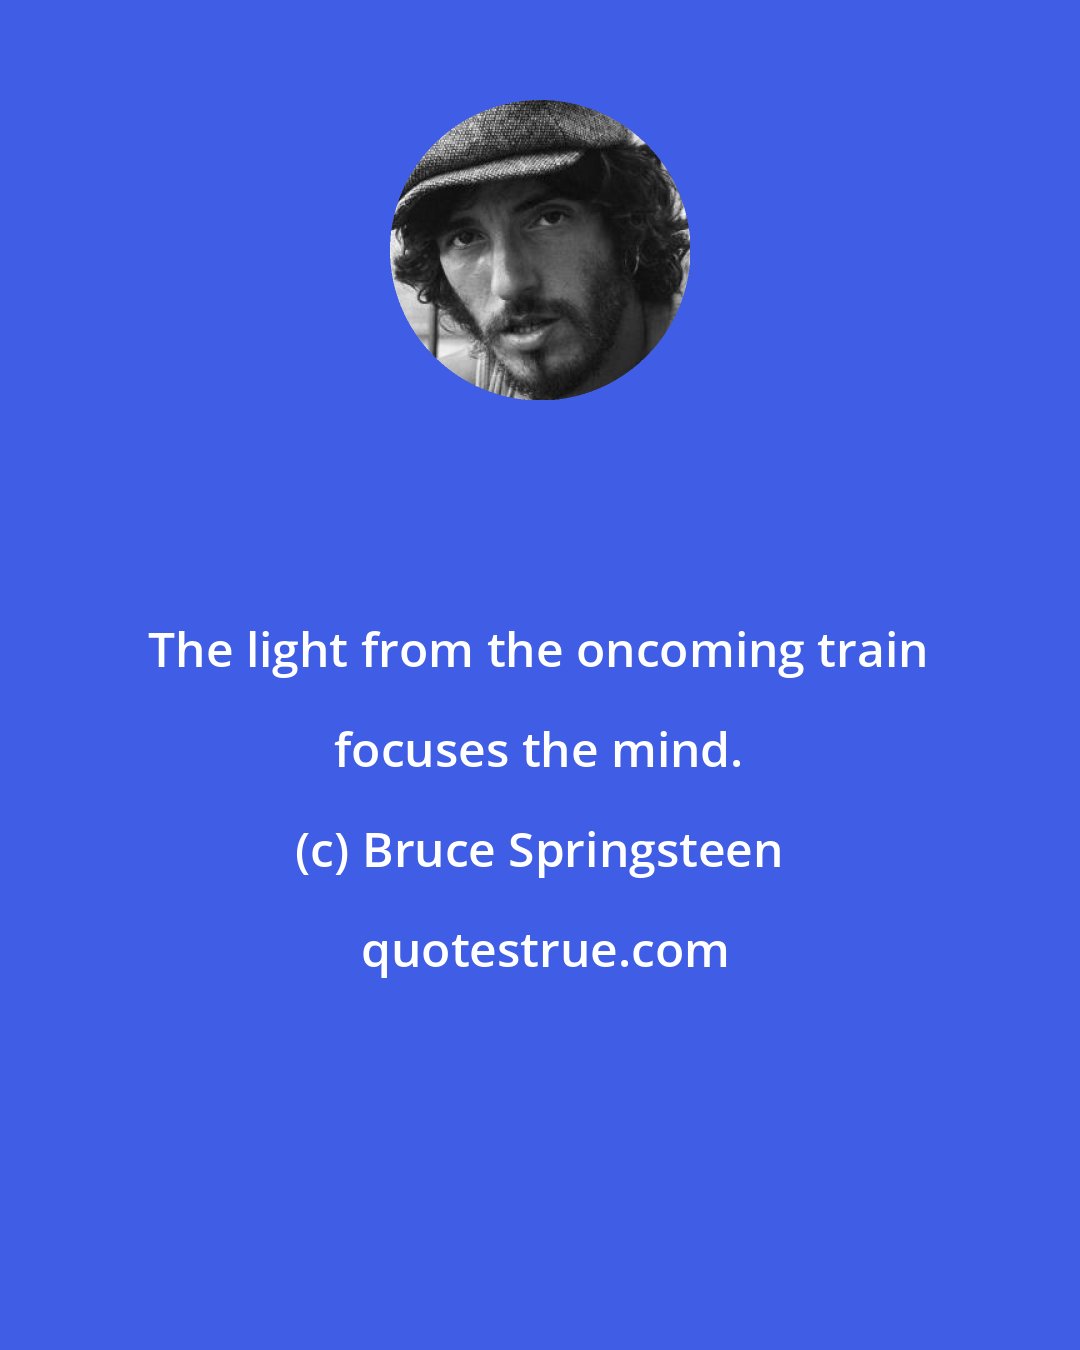 Bruce Springsteen: The light from the oncoming train focuses the mind.